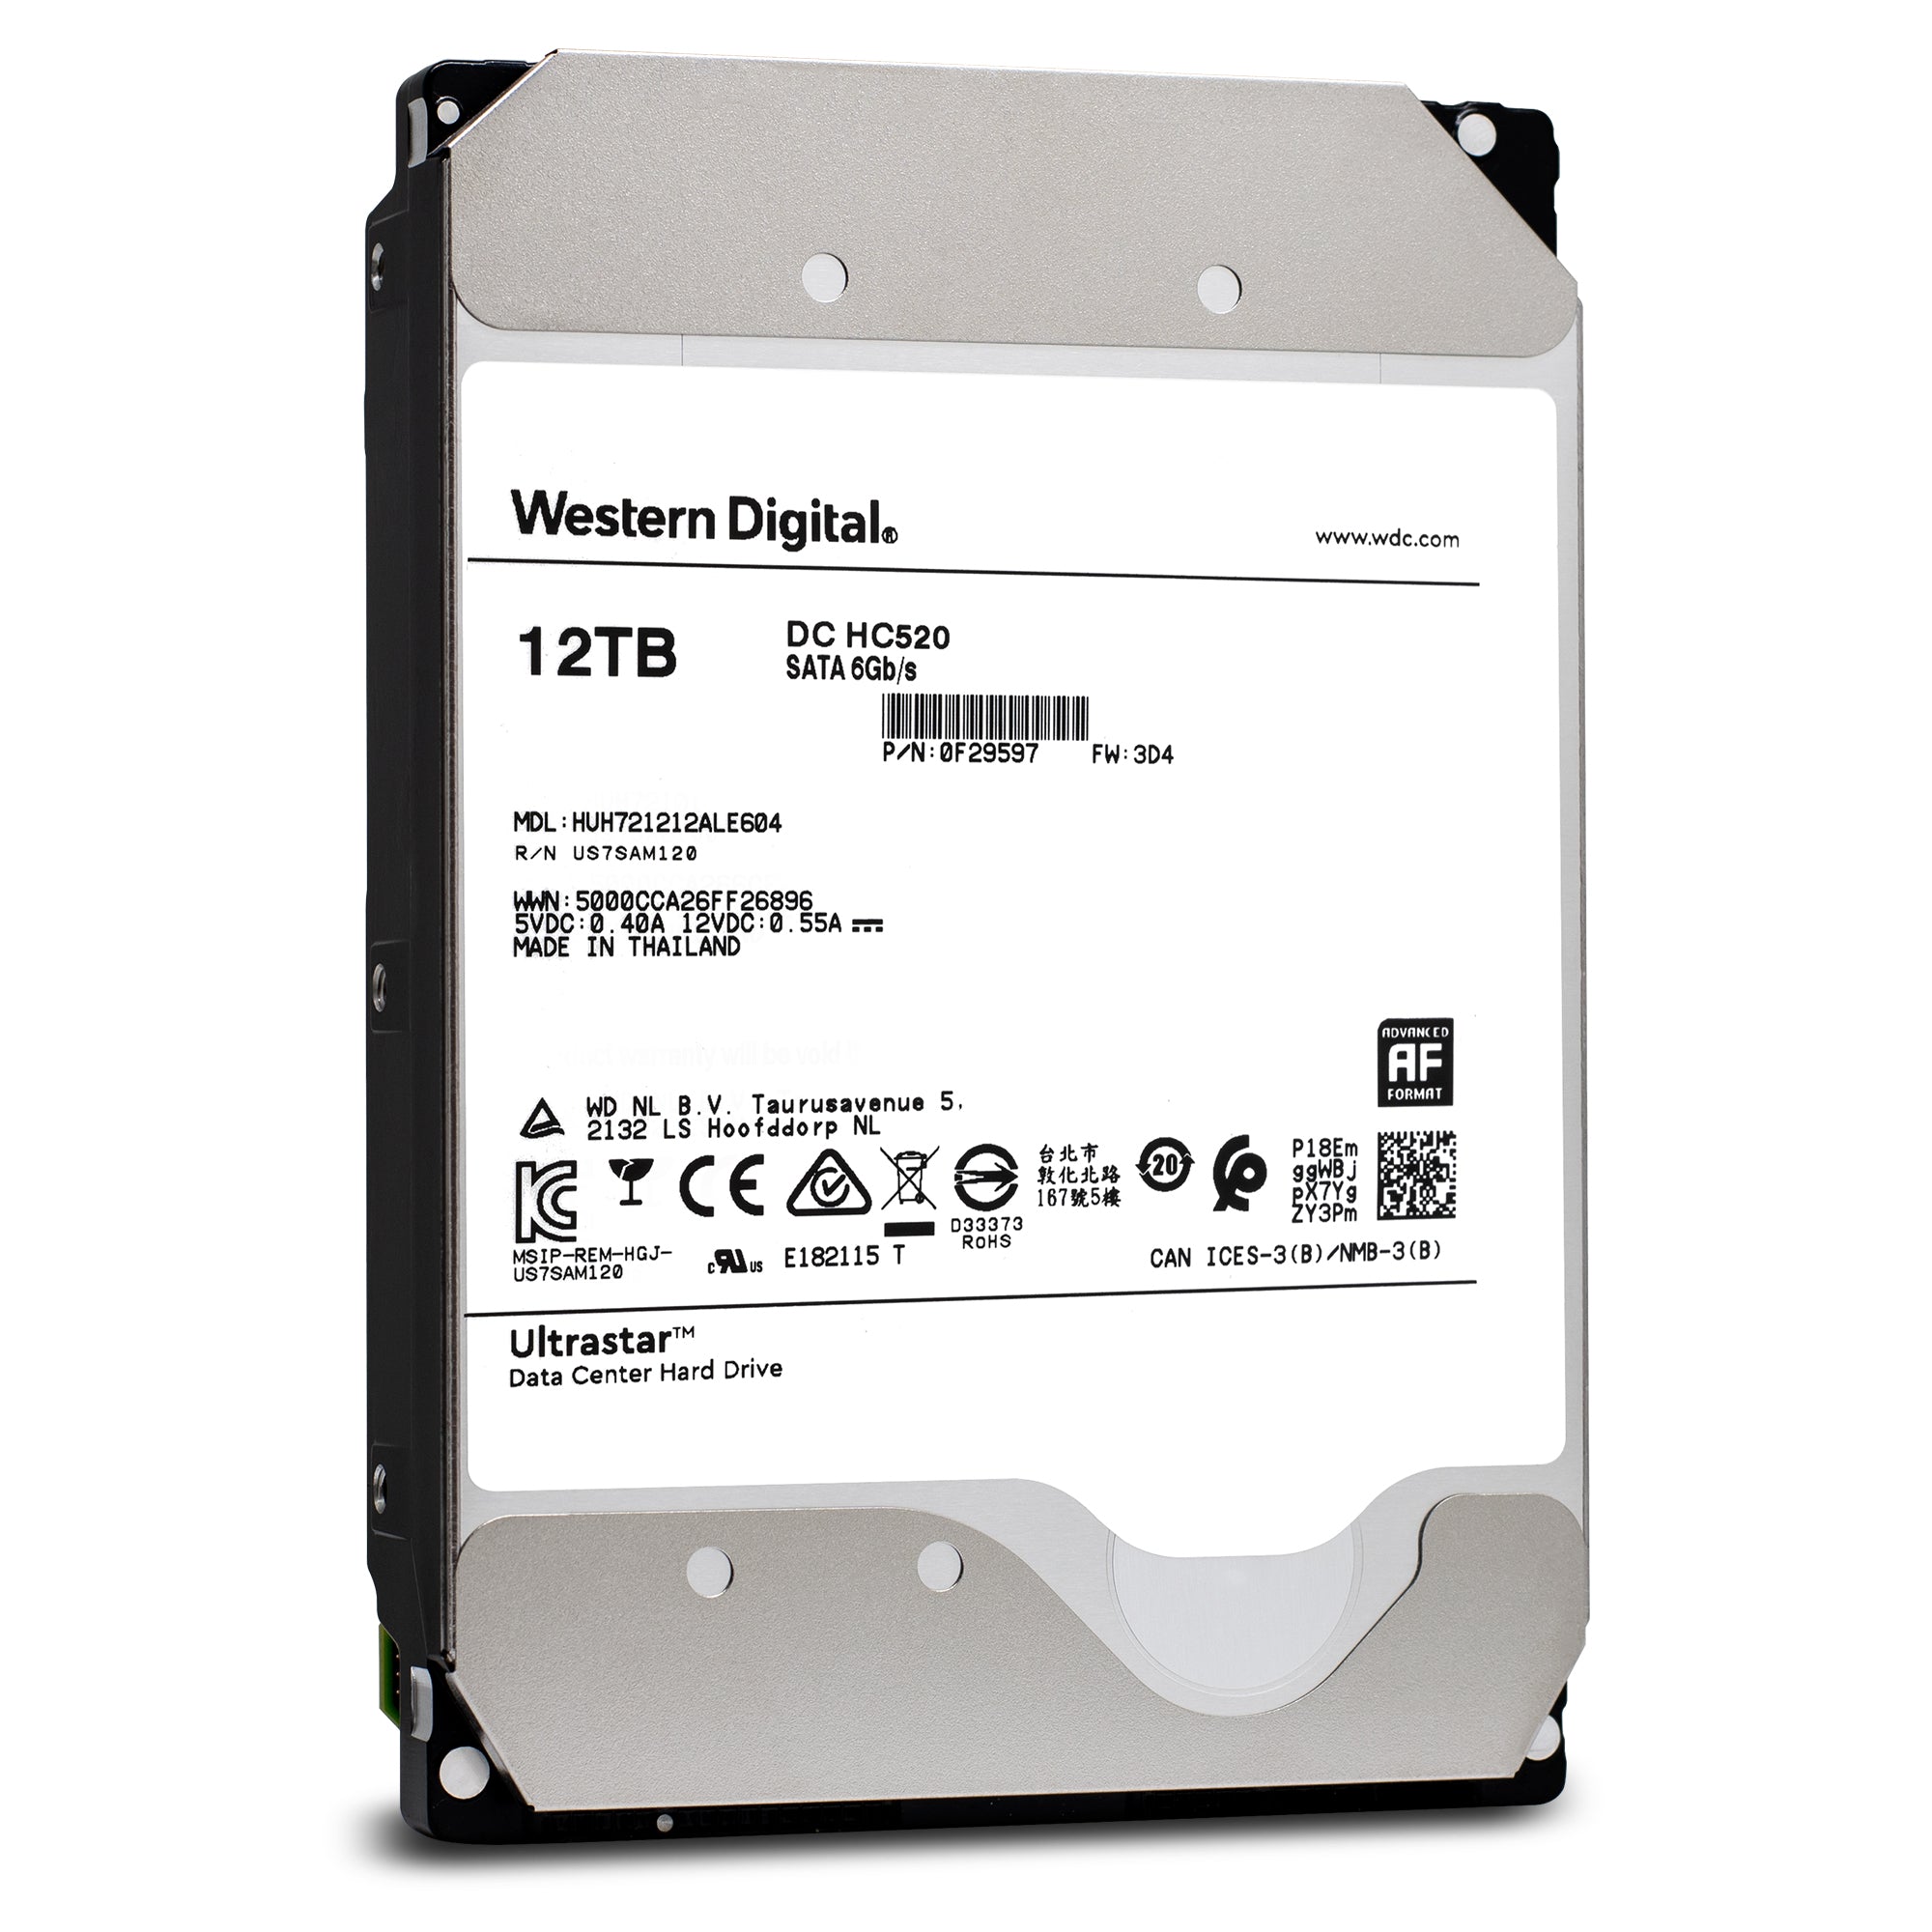 Western Digital Ultrastar DC HC520 HUH721212ALE604 0F29597 12TB 7.2K RPM SATA 6Gb/s 512e SE Power Disable Pin 3.5in Refurbished HDD Front View